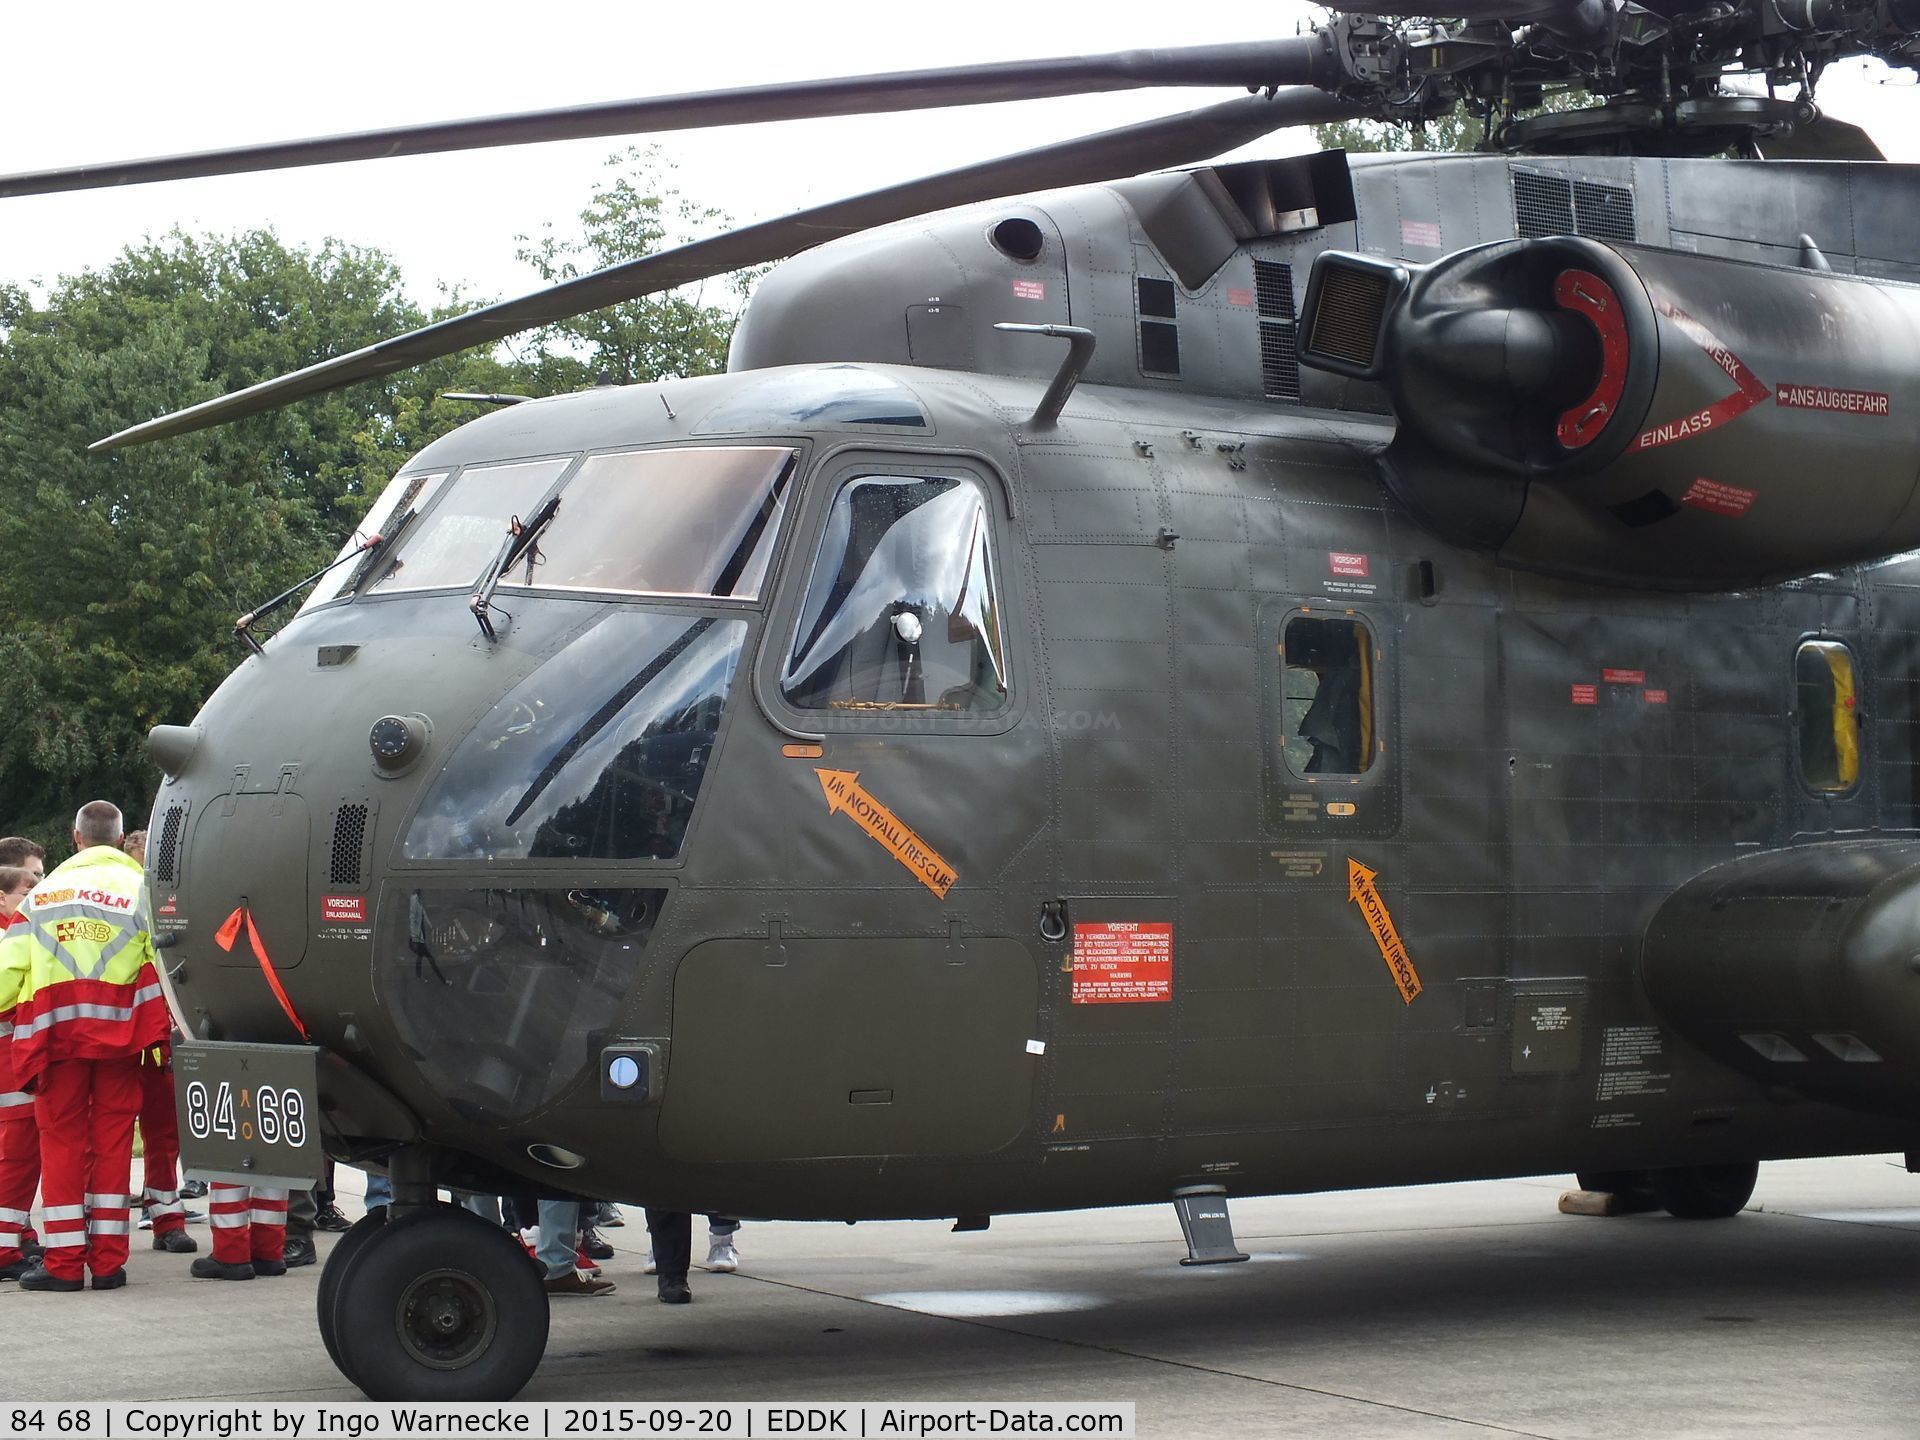 84 68, Sikorsky (VFW-Fokker) CH-53G C/N V65-066, Sikorsky (VFW-Fokker) CH-53G of the Luftwaffe (German Air Force) at the DLR 2015 air and space day on the side of Cologne airport